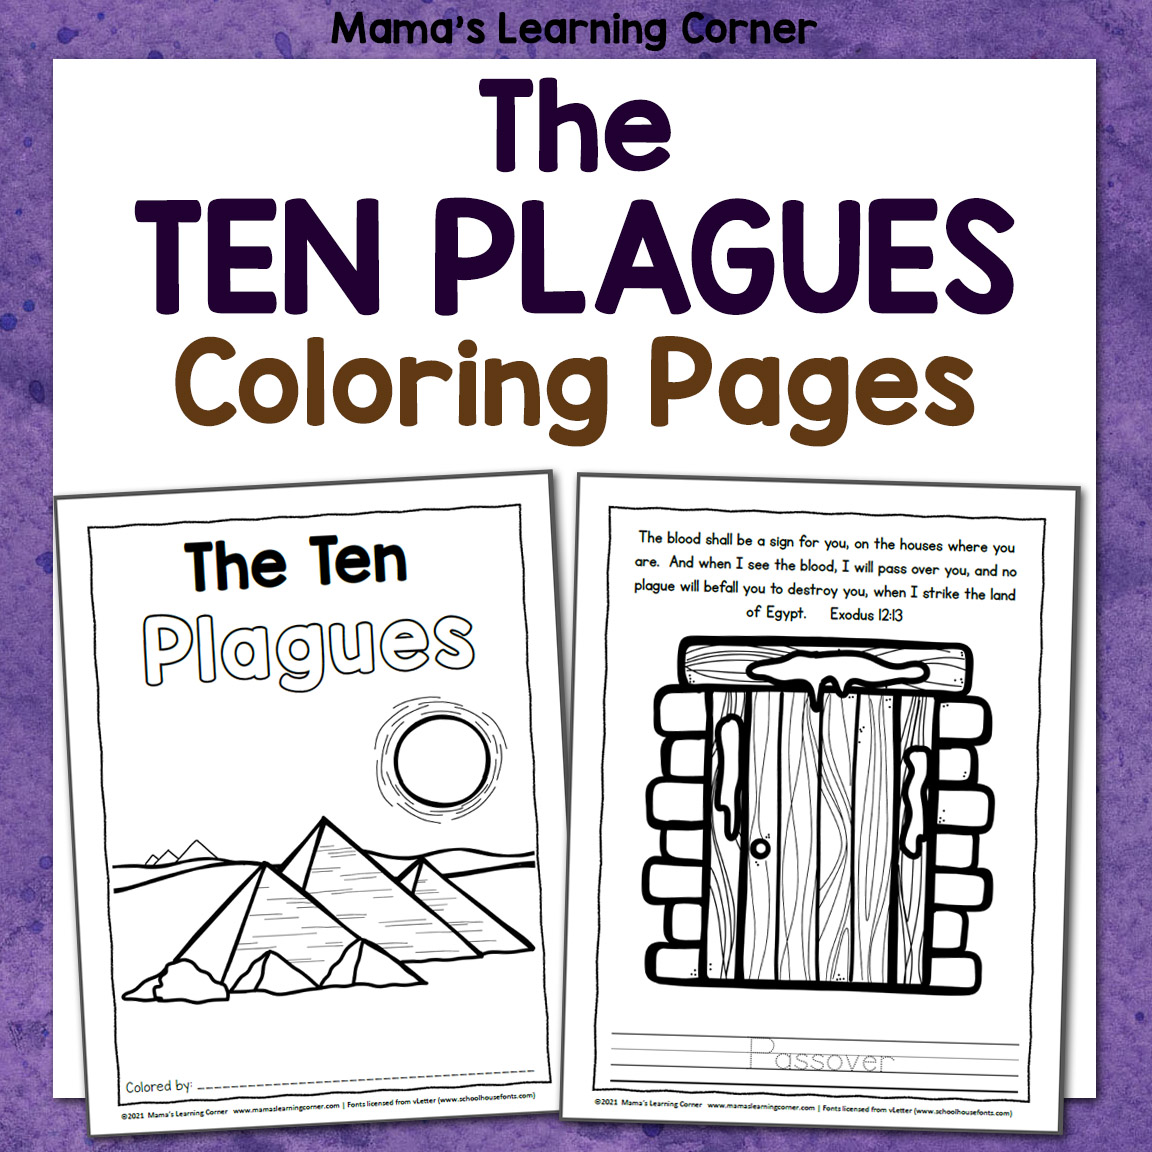 The ten plagues coloring pages made by teachers